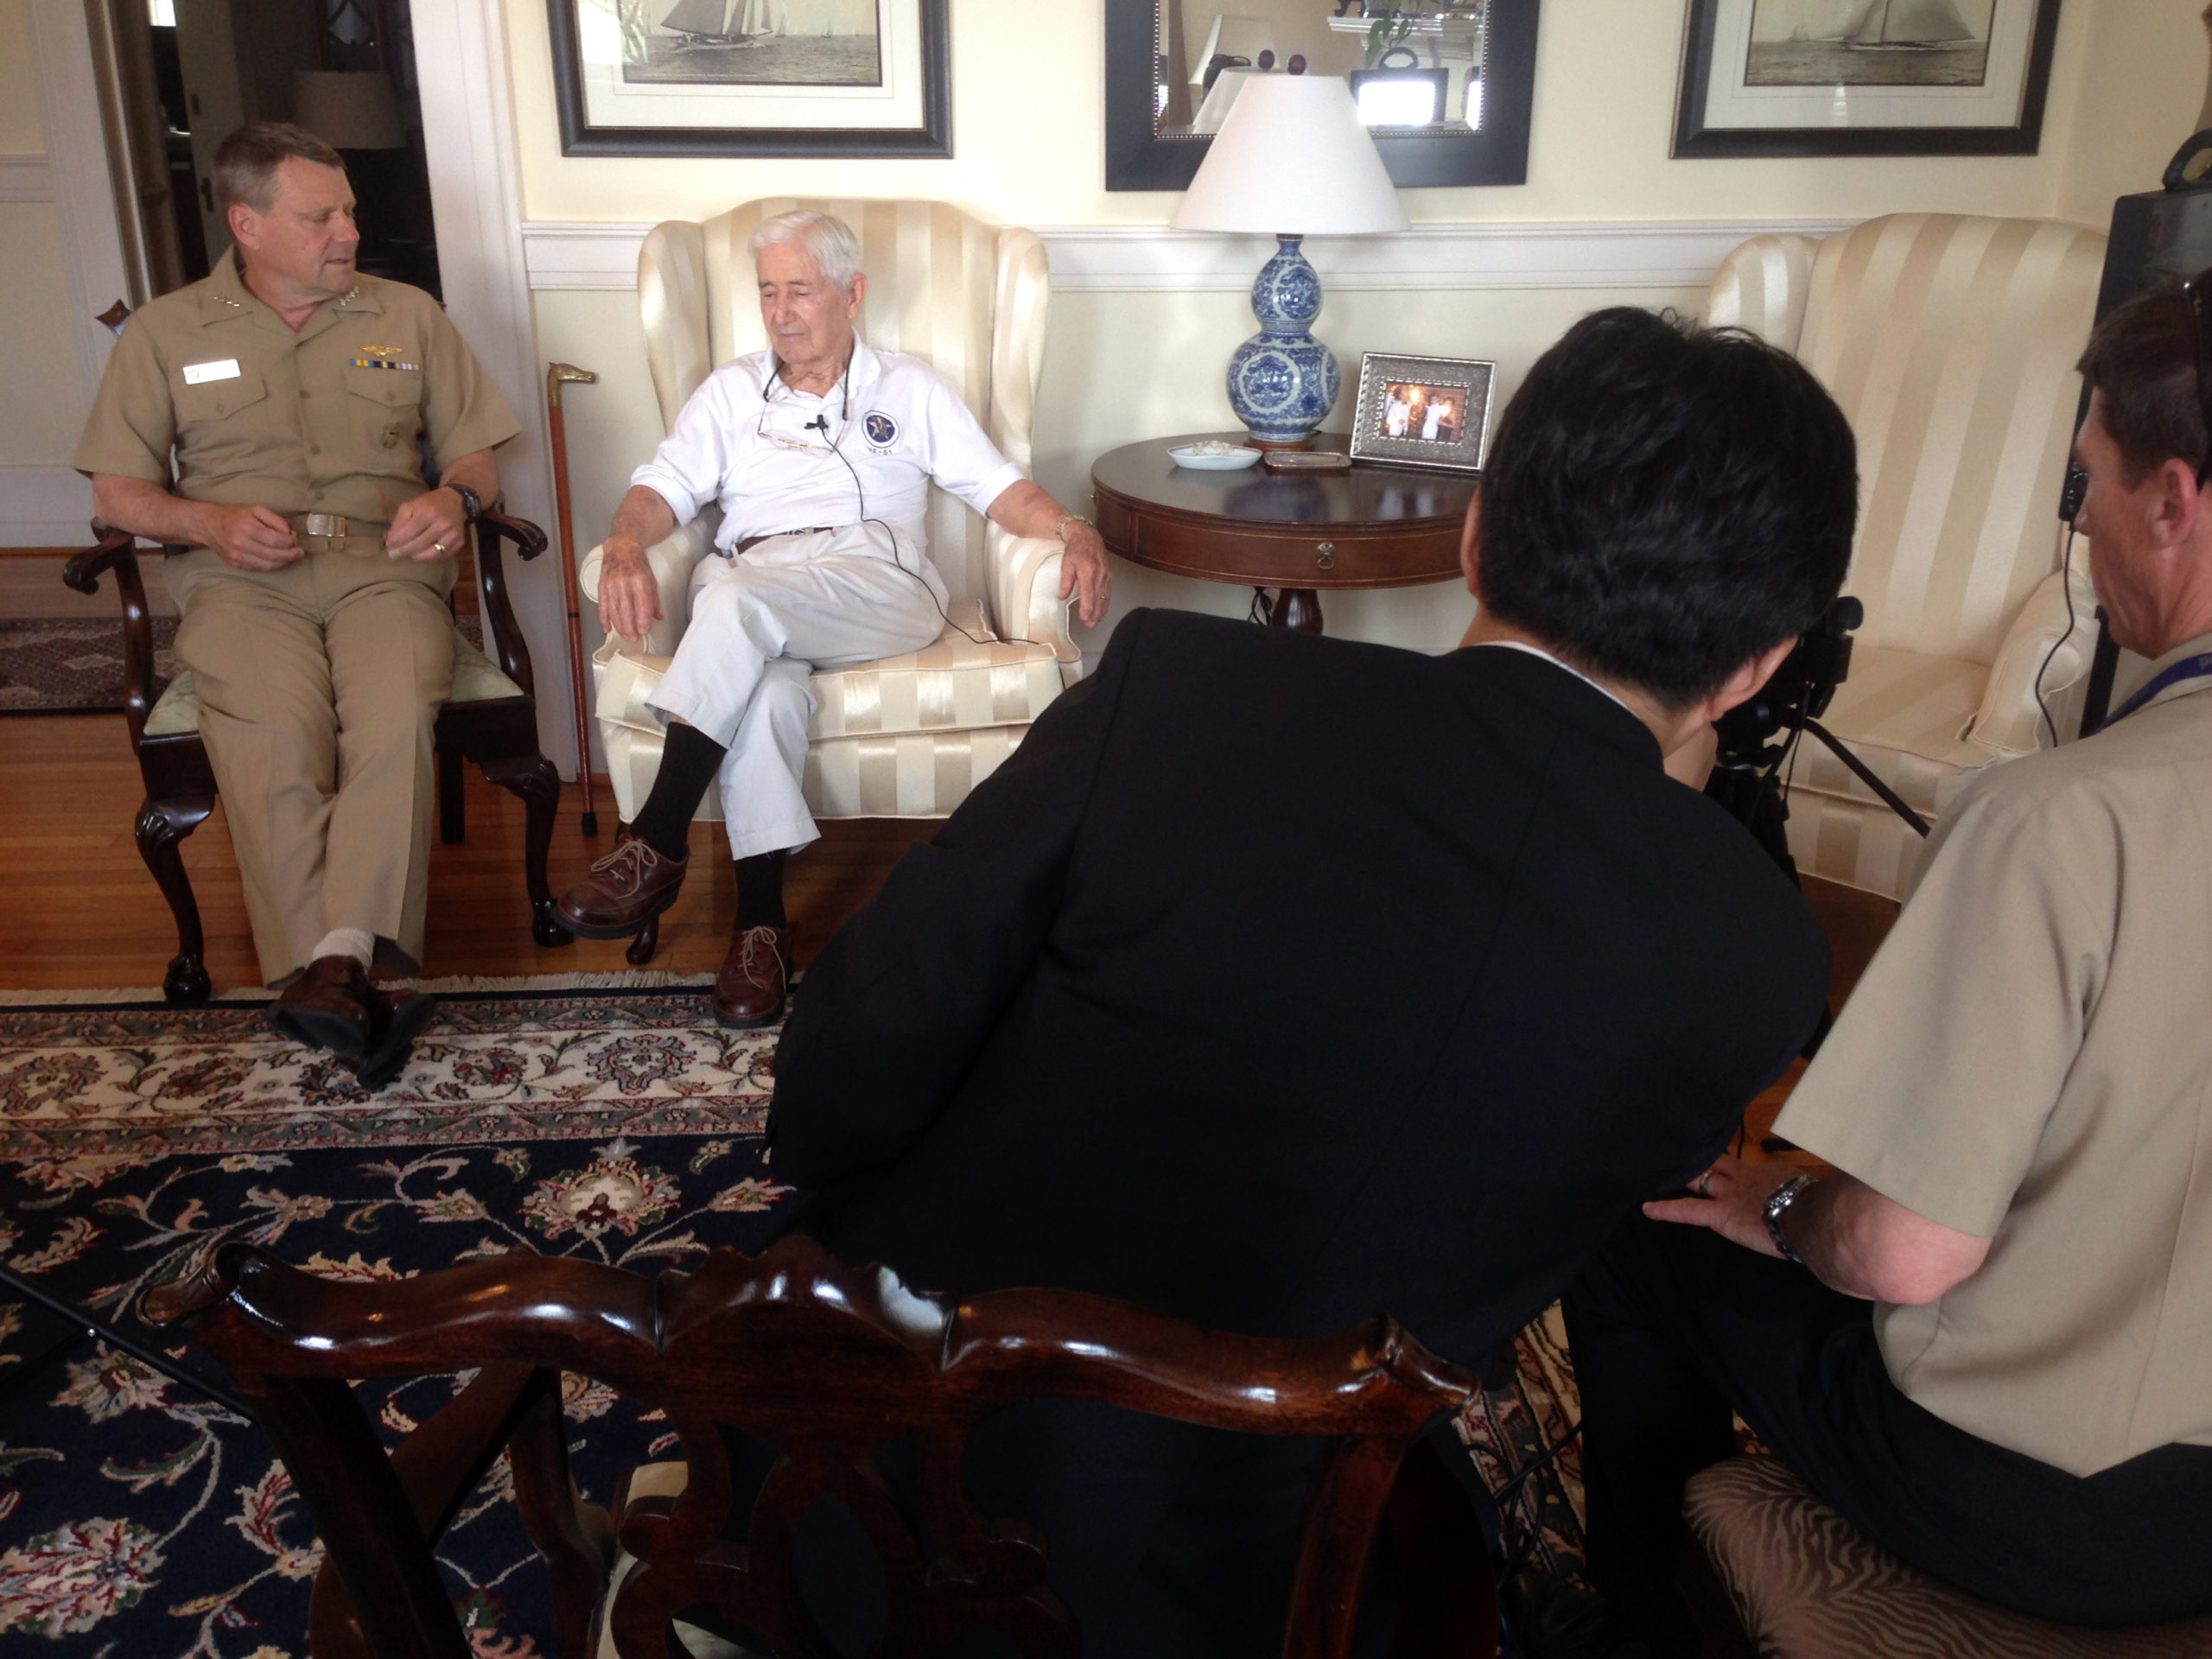 Interview Day Candid, Provided by Captain Jane Campbell, US Navy Fleet Forces, Norfolk VA on June 23, 2014